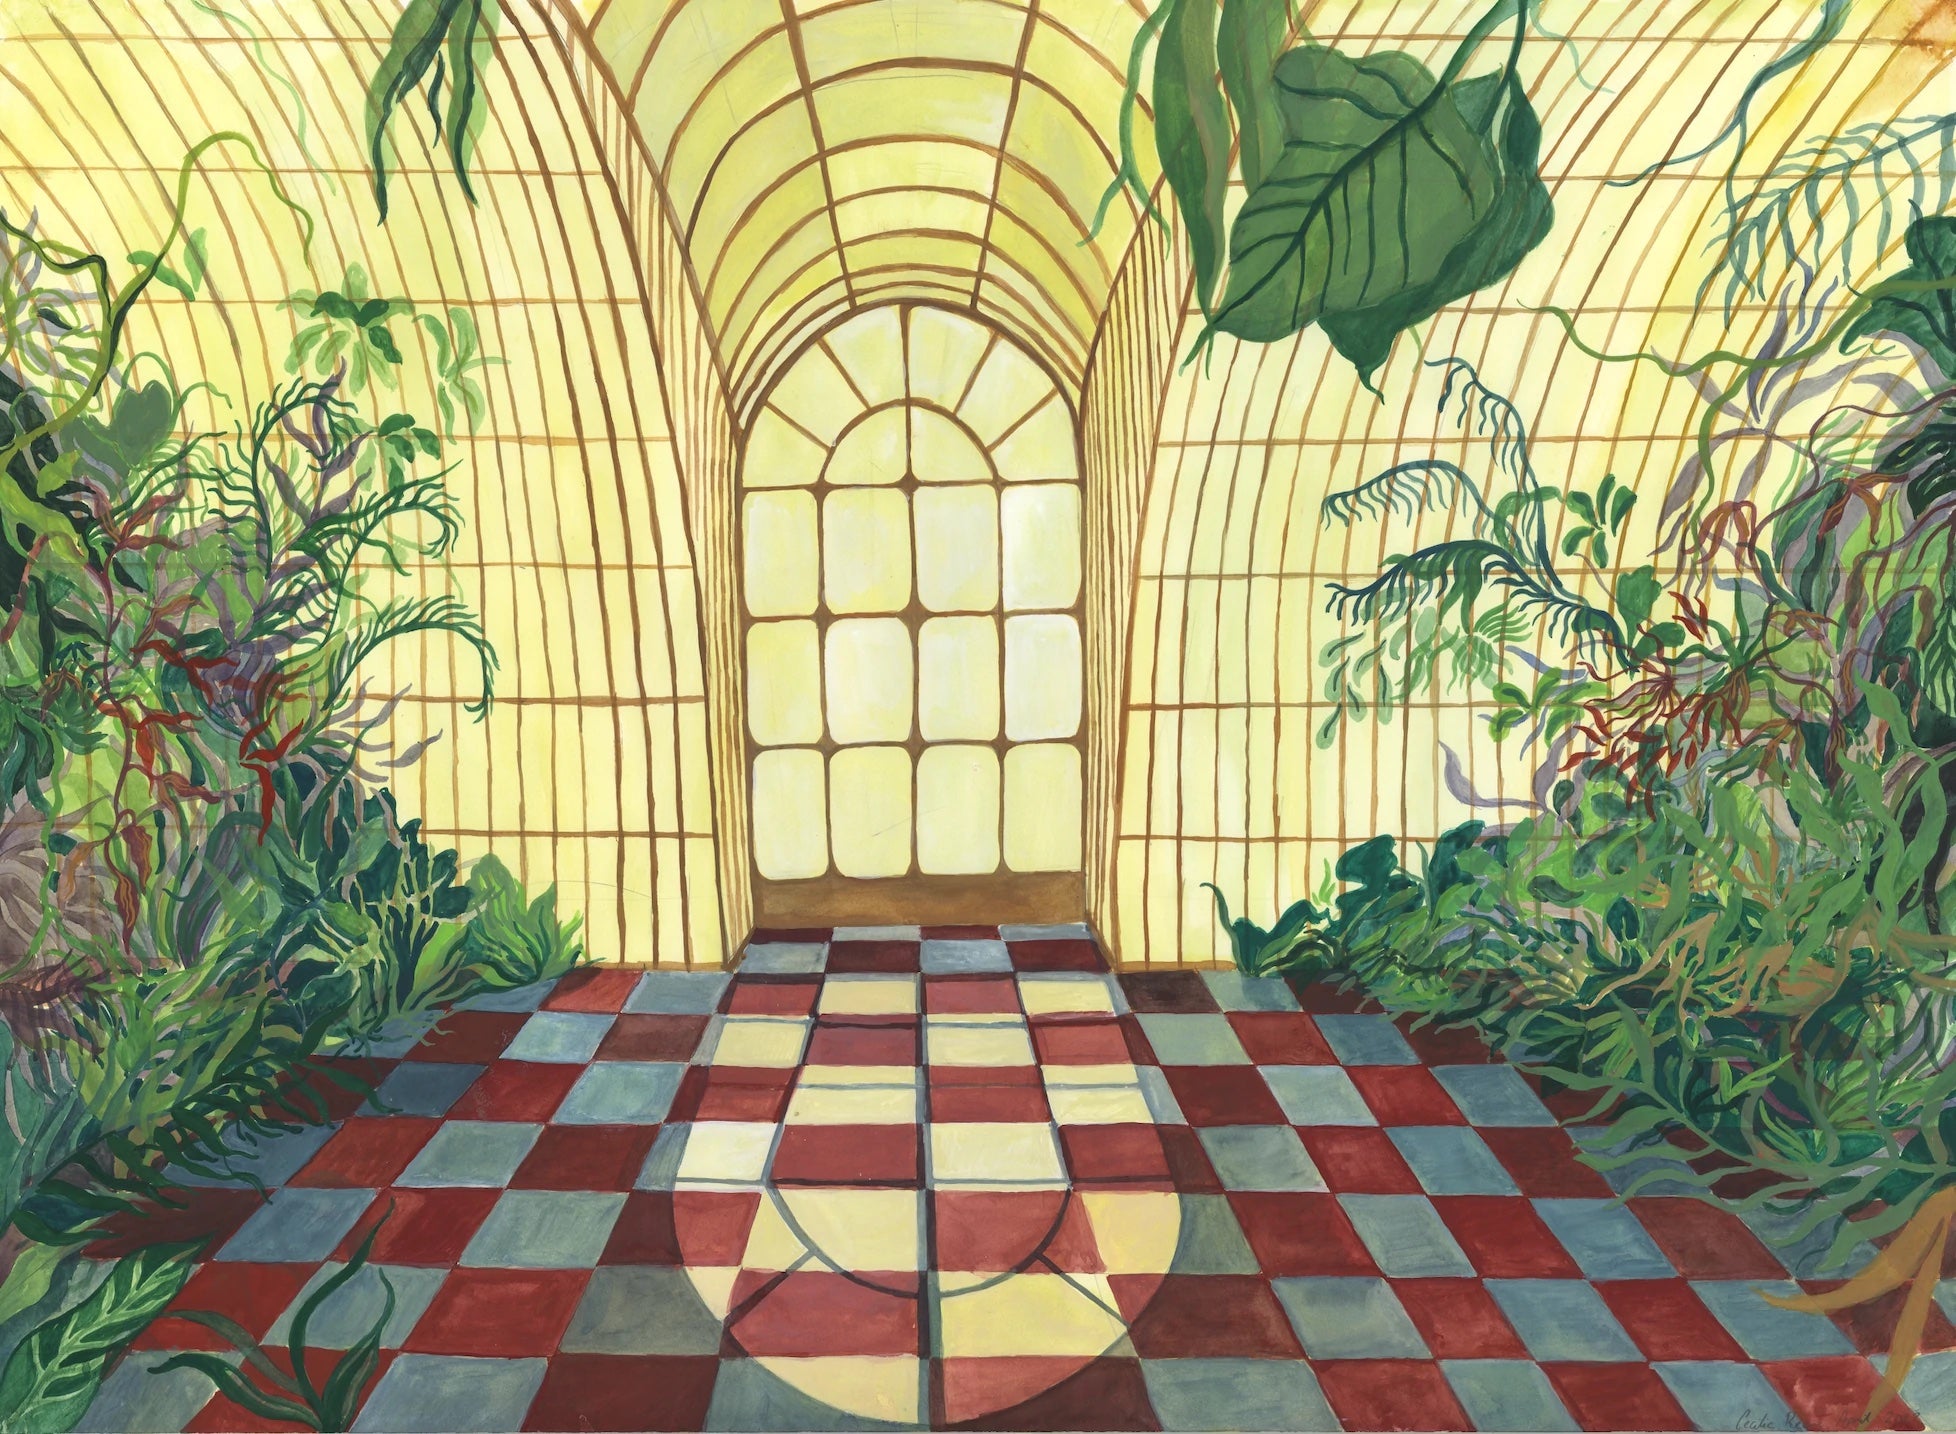 The Greenhouse Print (A1)